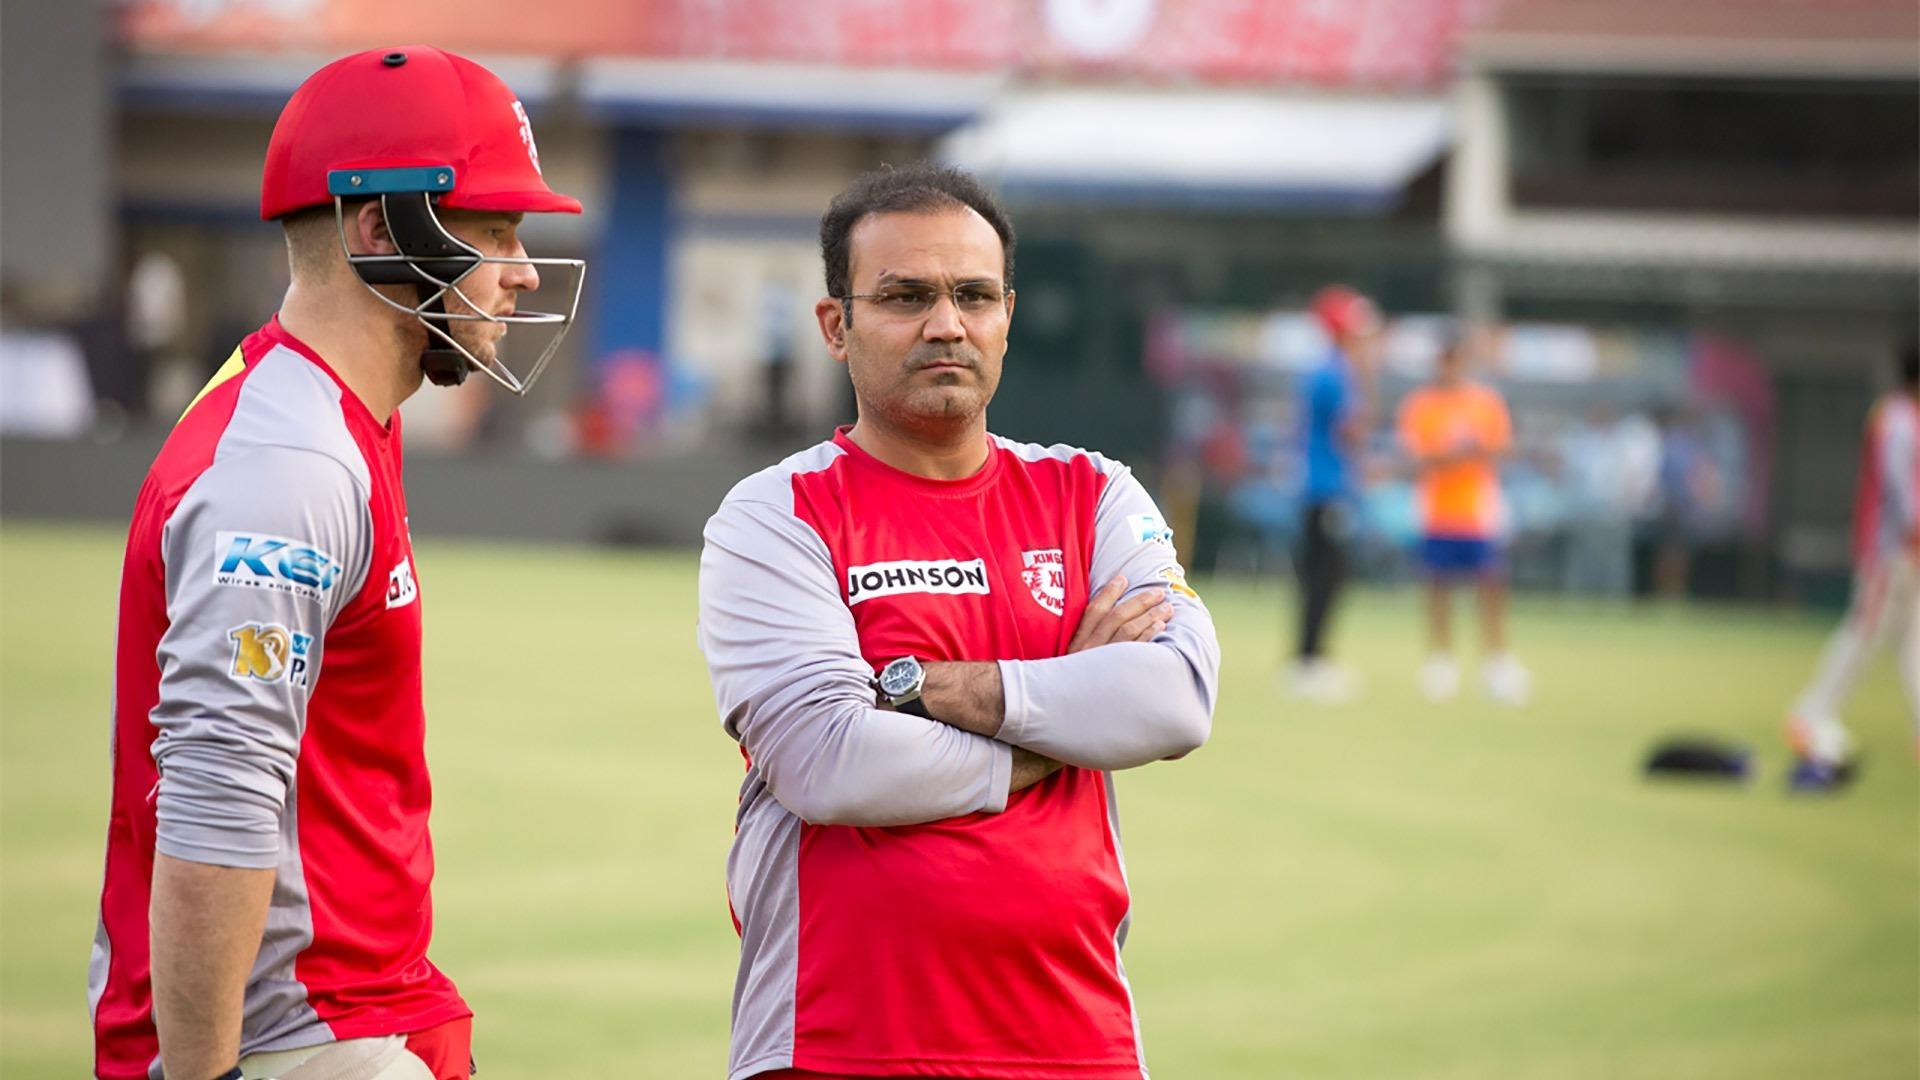 Marquees da Market: In the words of Virender Sehwag. KXIP